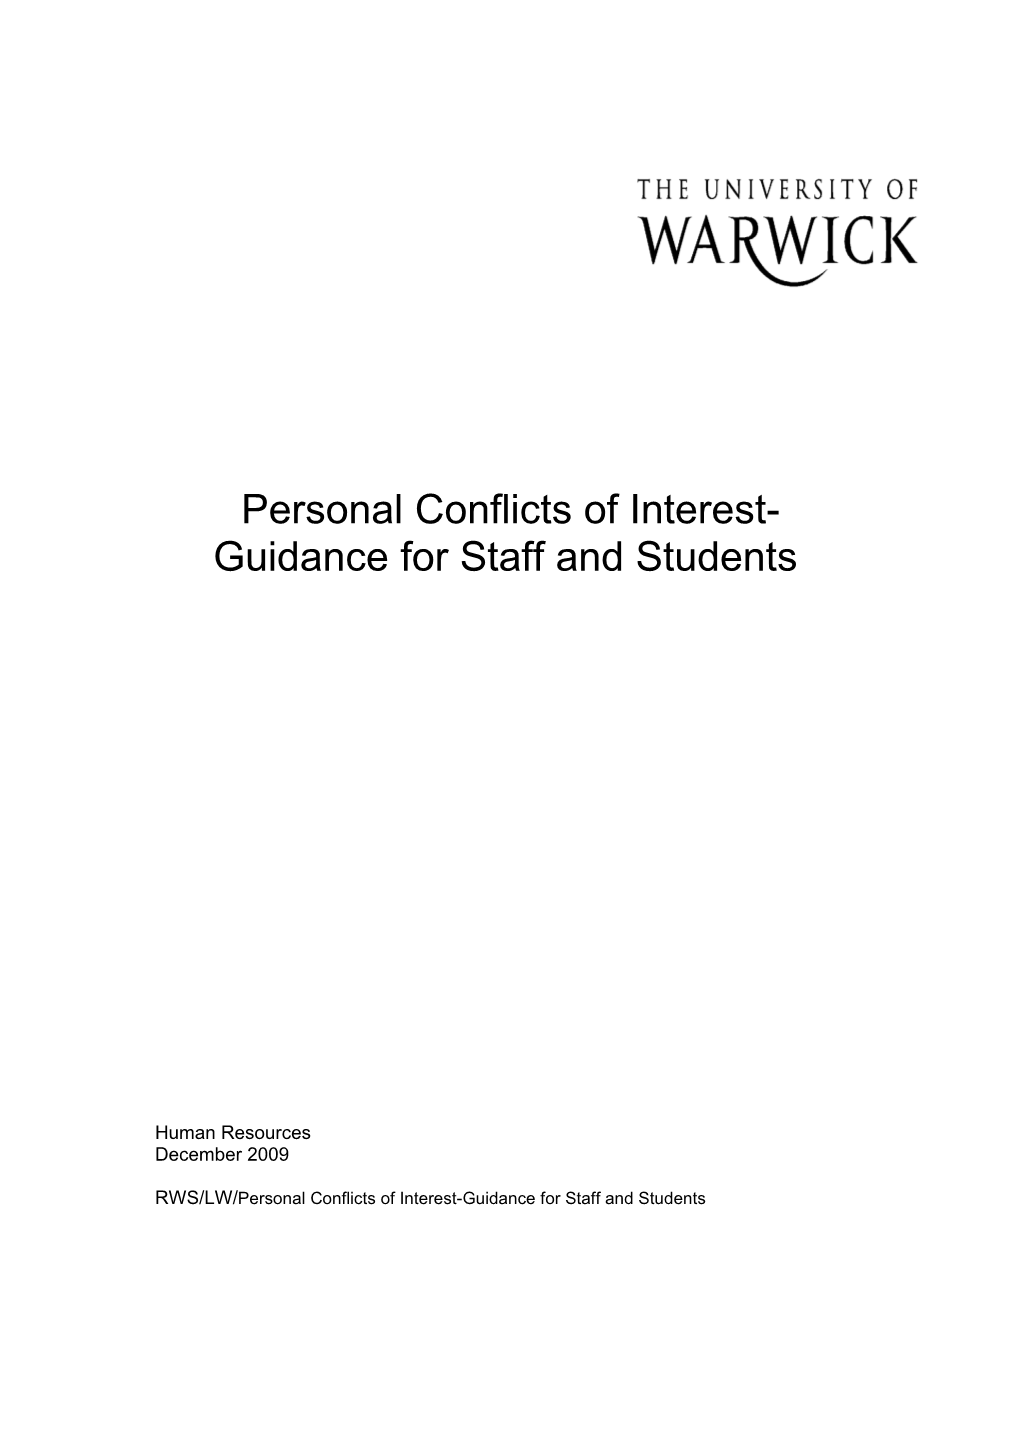 Guidance for Staff and Students